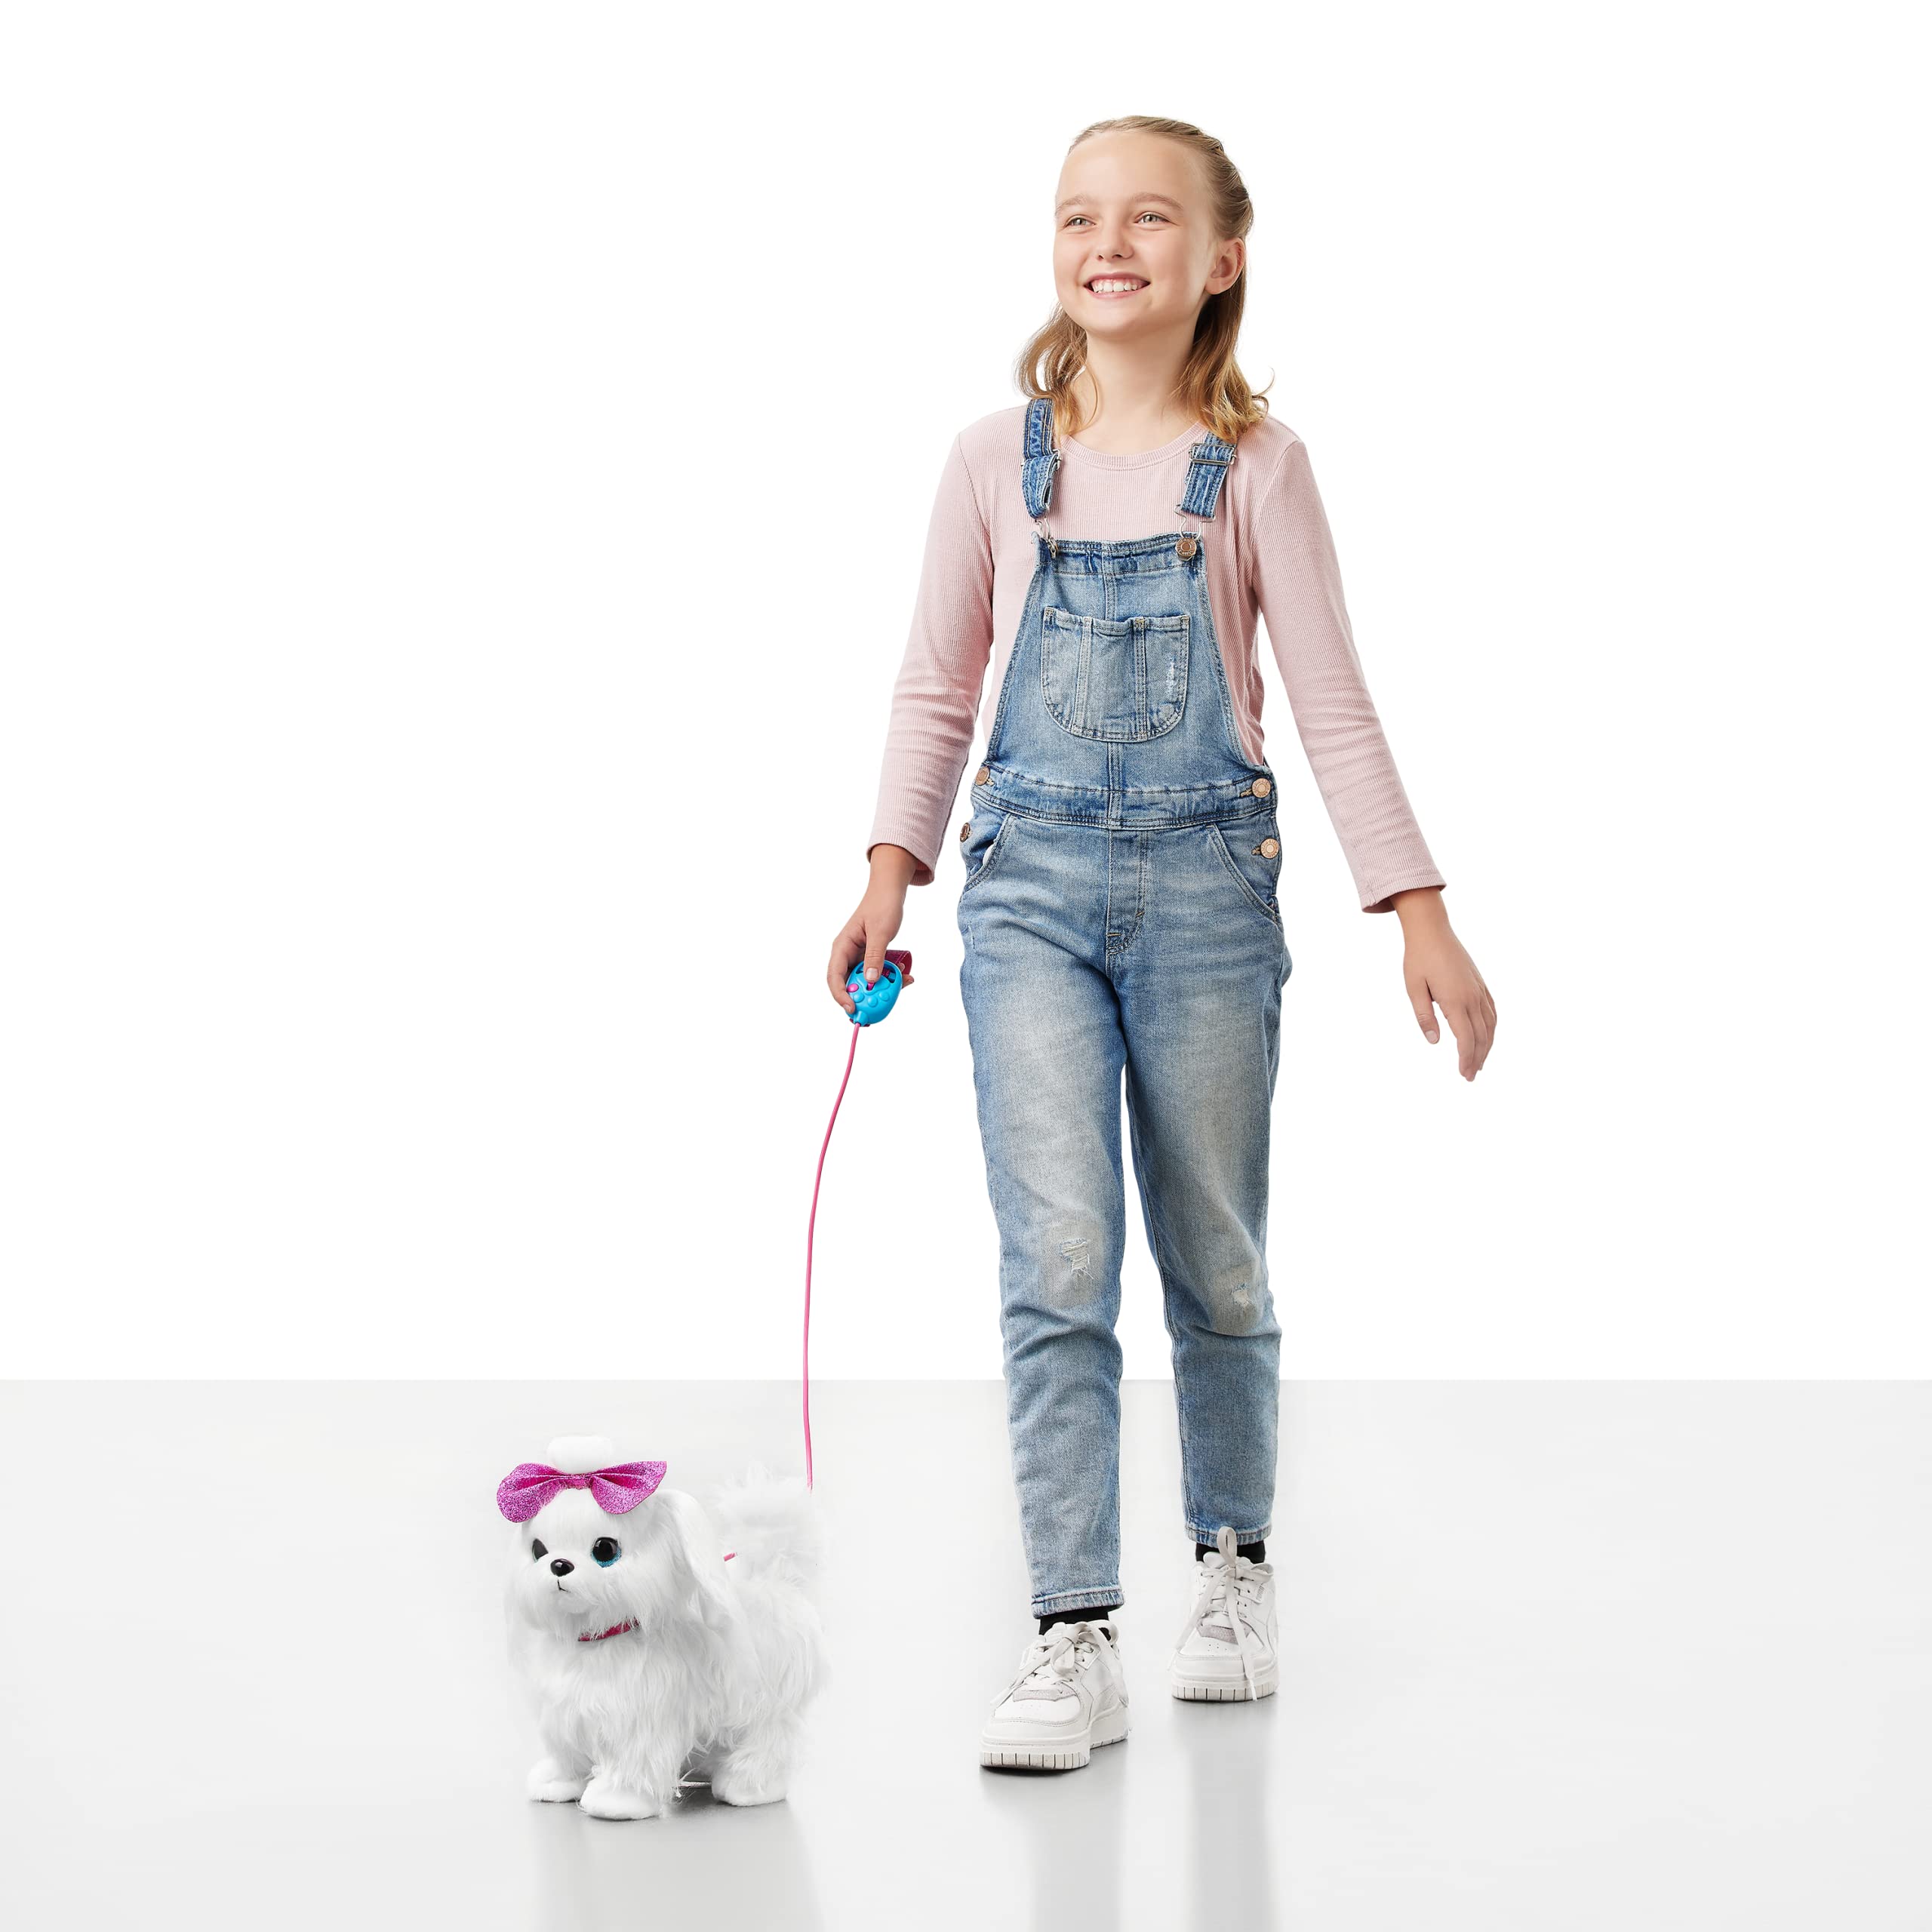 Pets Alive Lil' Paw The Walking Puppy by ZURU Interactive Dog That Walk, Waggle, and Barks, Interactive Plush Pet, Electronic Leash, Soft Toy for Kids and Girls